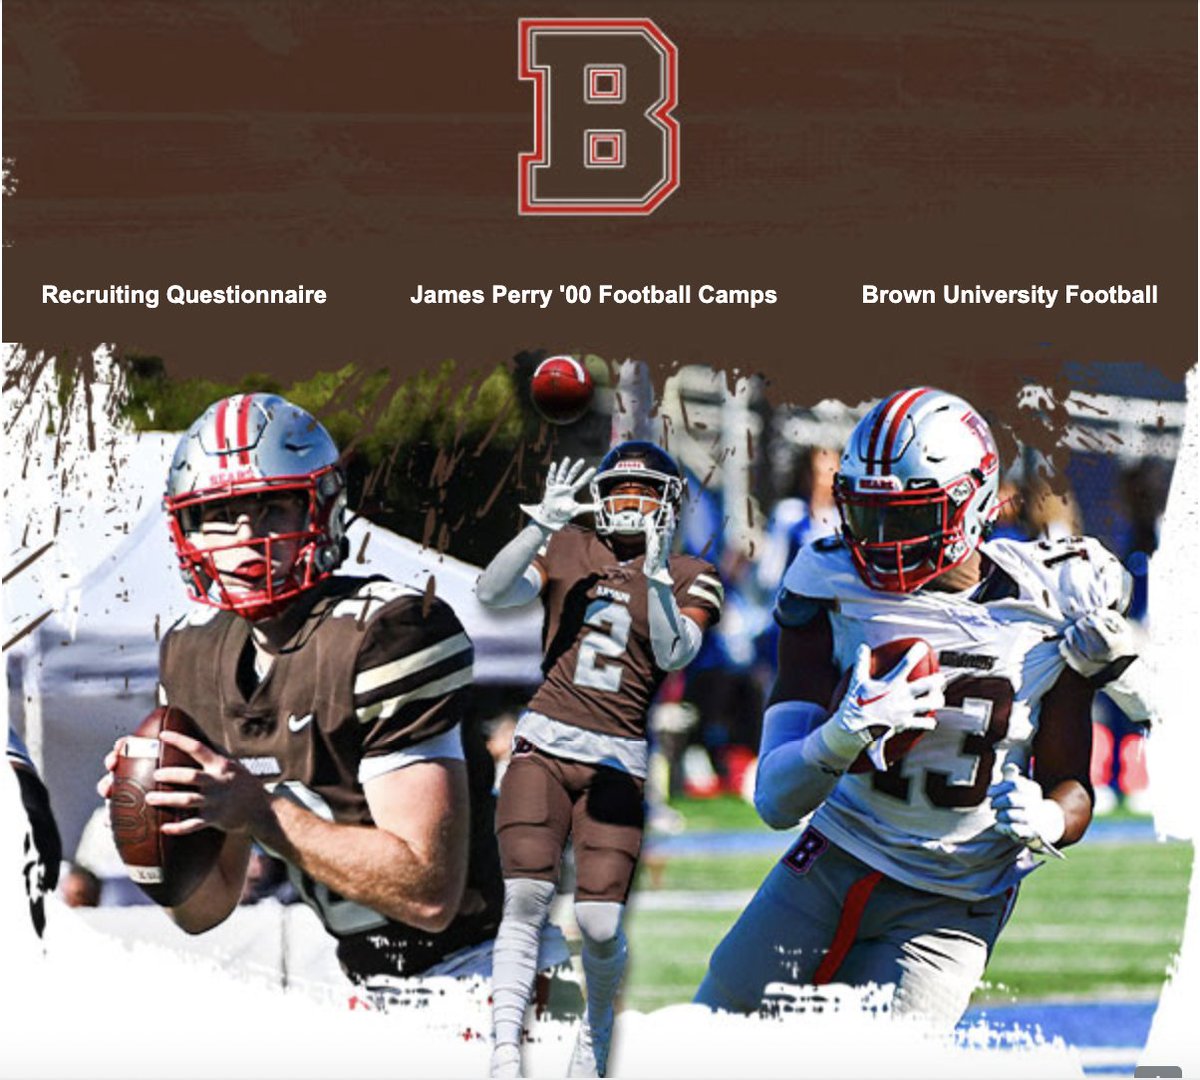 Thank you @BrownHCPerry for the personal invite to @BrownU_Football camp.  Looking forward to being on campus.  #EverTrue | #BrownBuilt
@Browncoachweave @CoachW_Edwards @jerryflora1 @Coach_RMattison @coachDjackson1 @coachgeenty